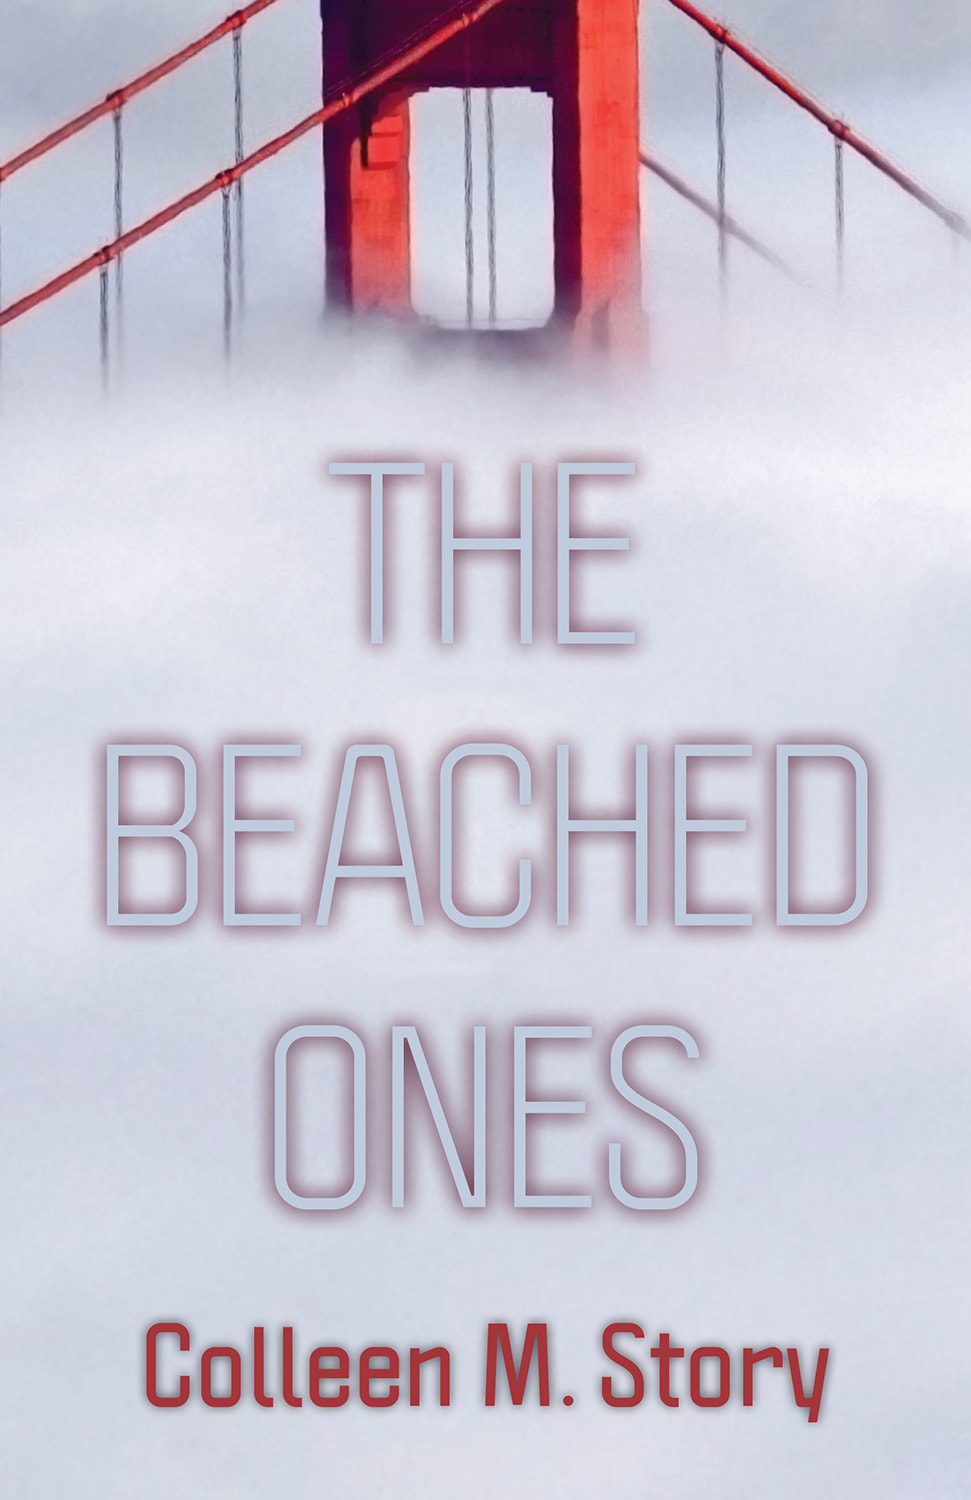 THE BEACHED ONES by Colleen M. Story